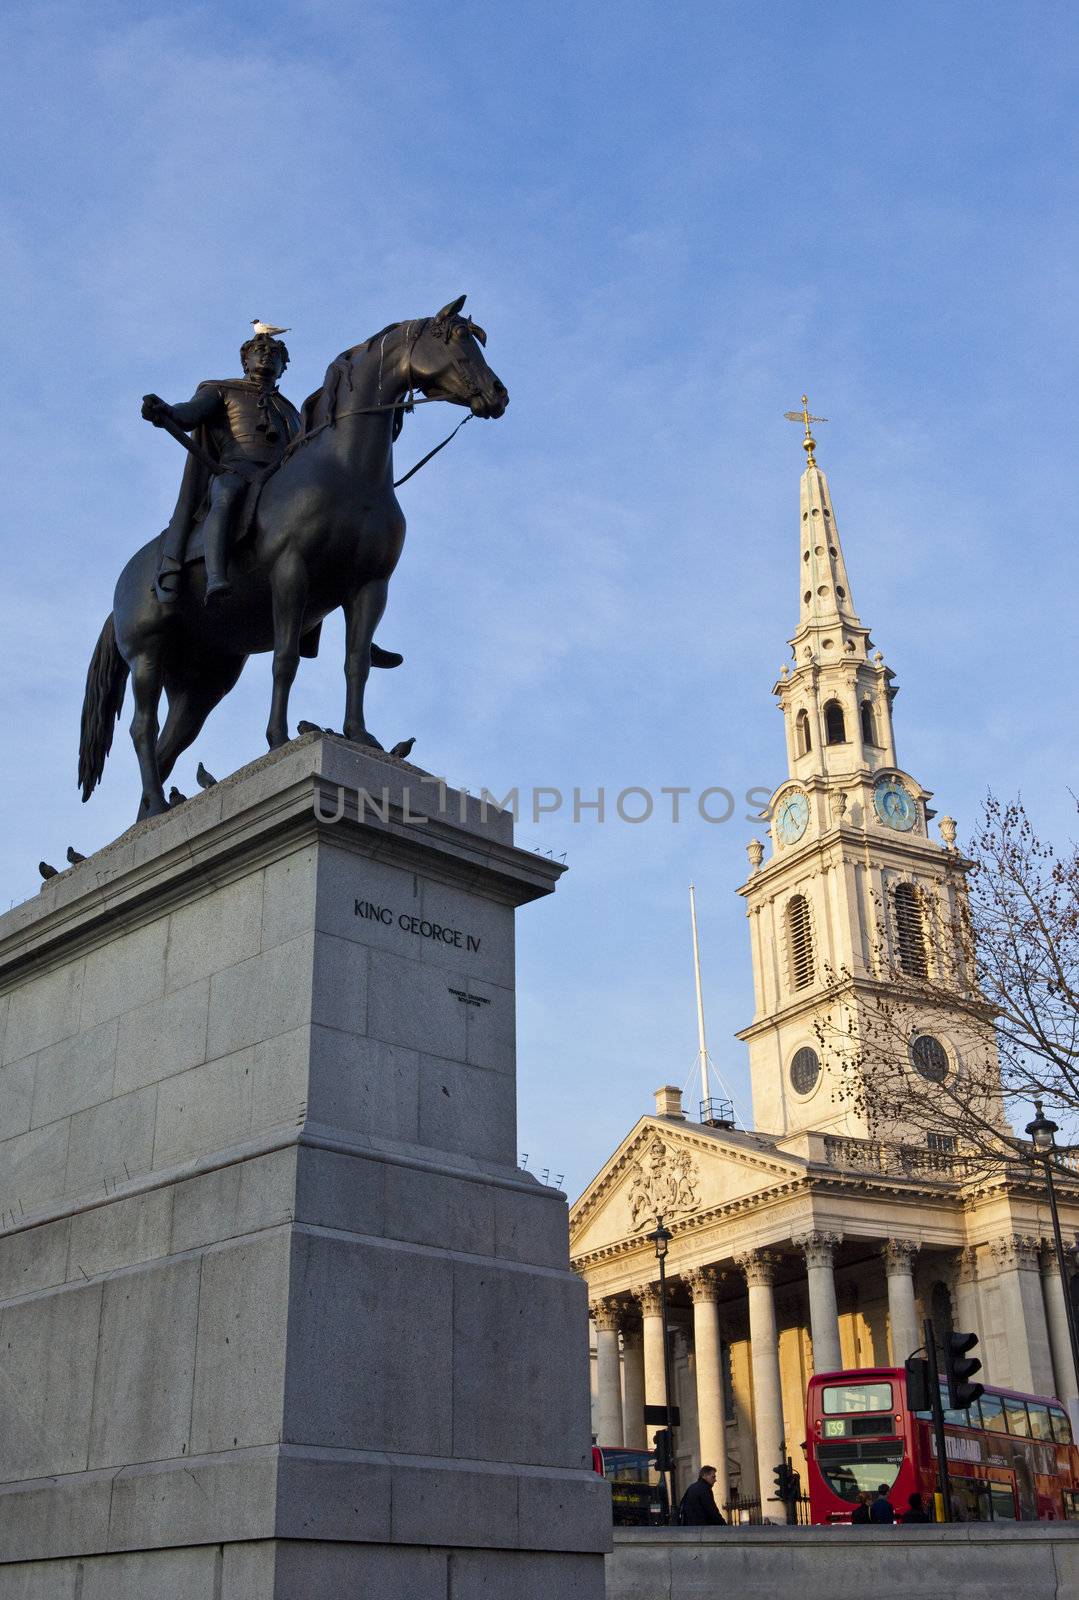 King George IV Statue and St Martin-in-the-Fields Church in London by chrisdorney